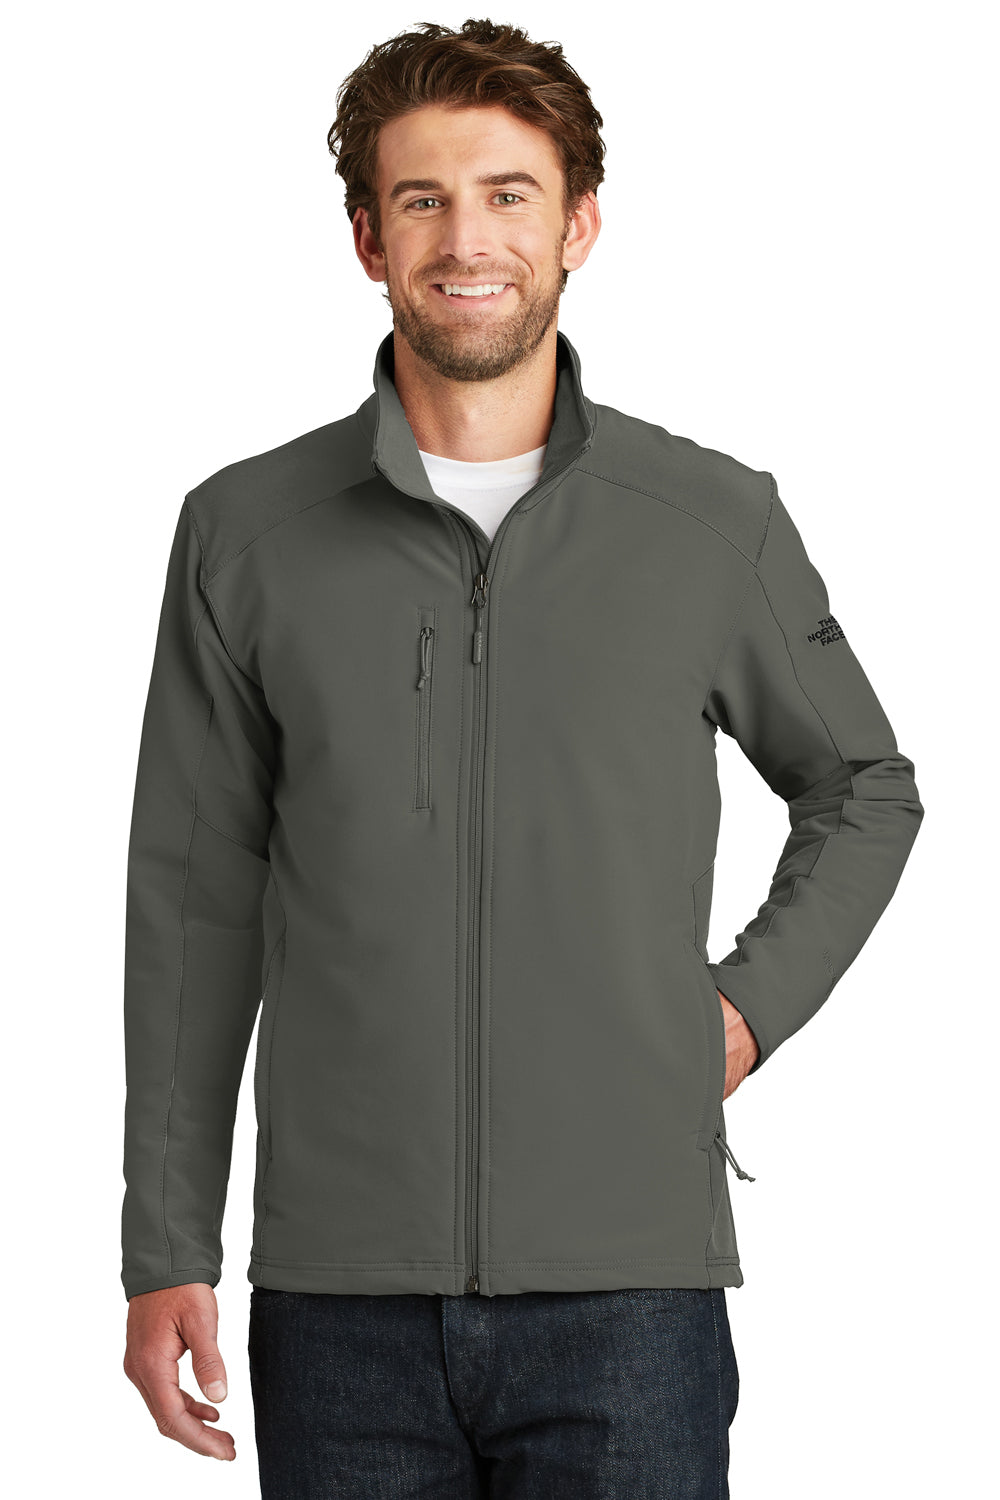 The North Face NF0A3LGV Mens Tech Wind & Water Resistant Full Zip Jacket Asphalt Grey Front